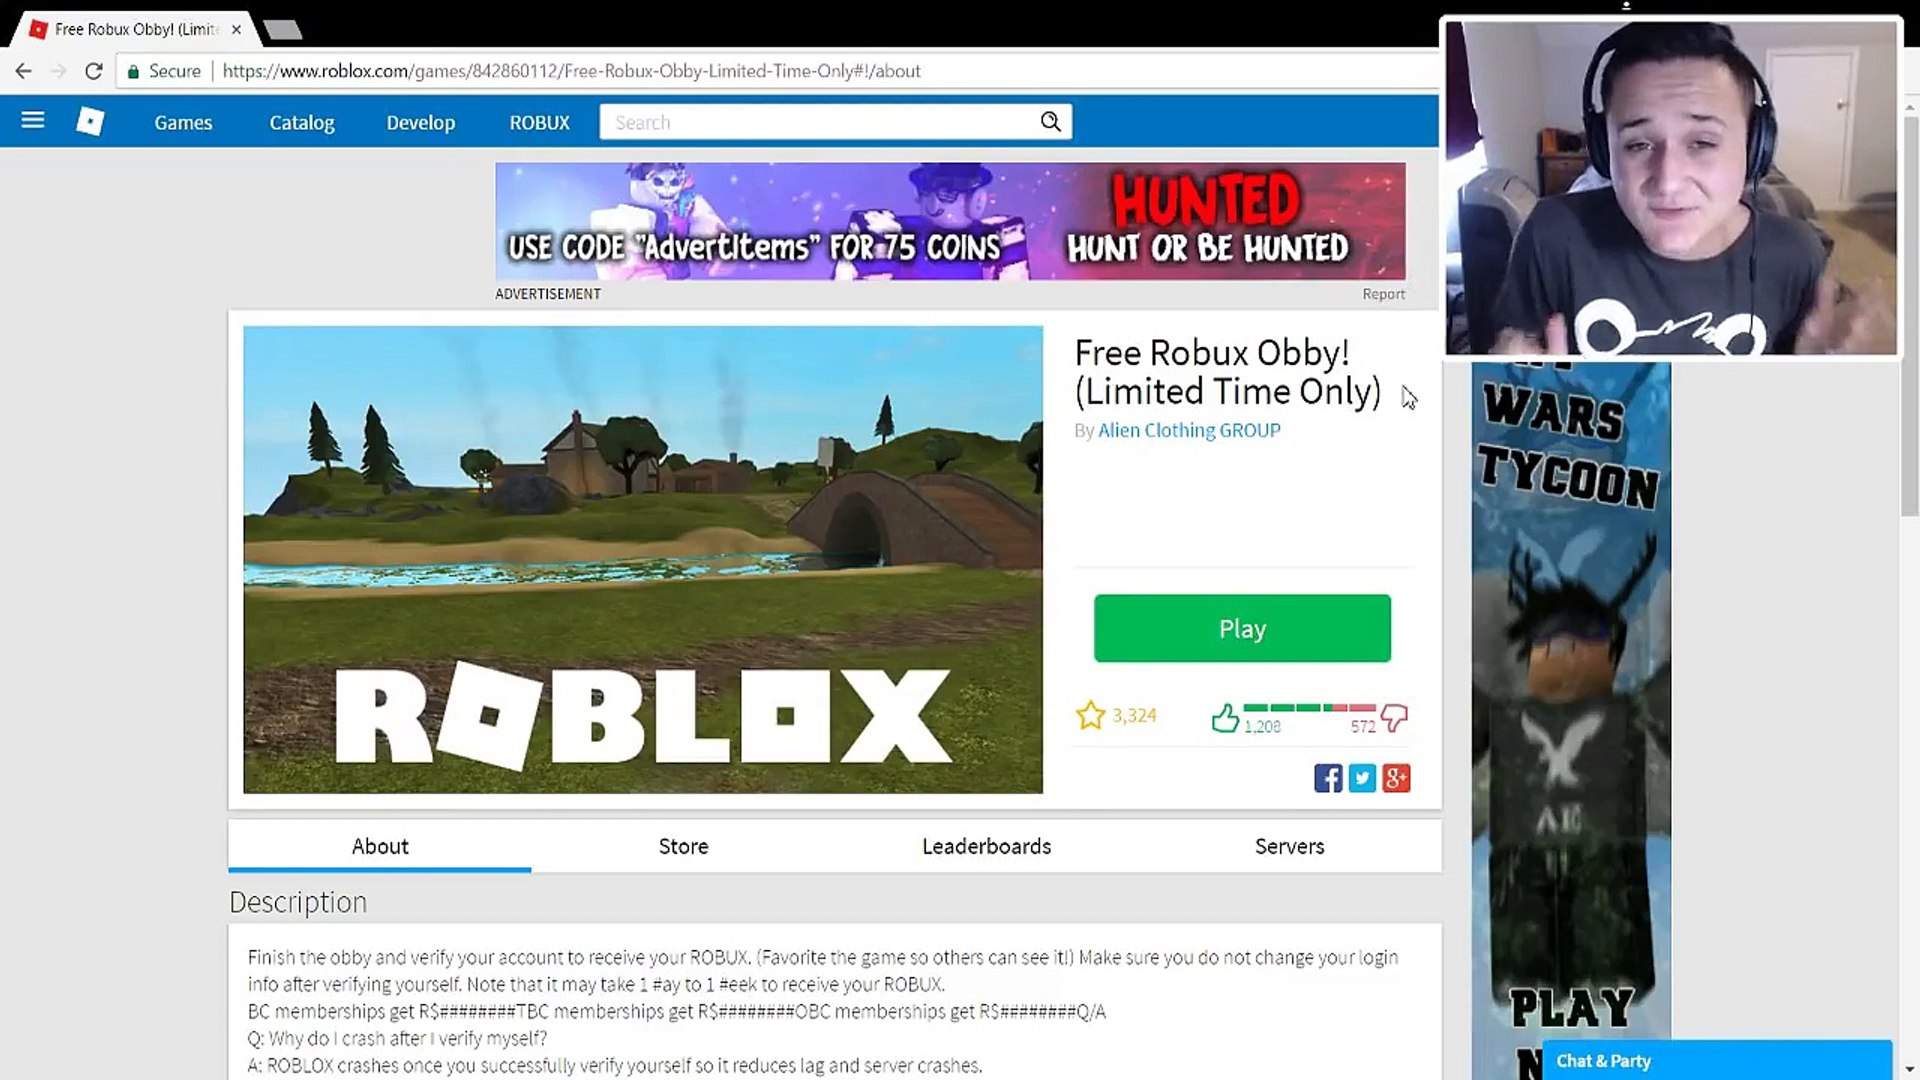 Roblox Games Give Free Robux